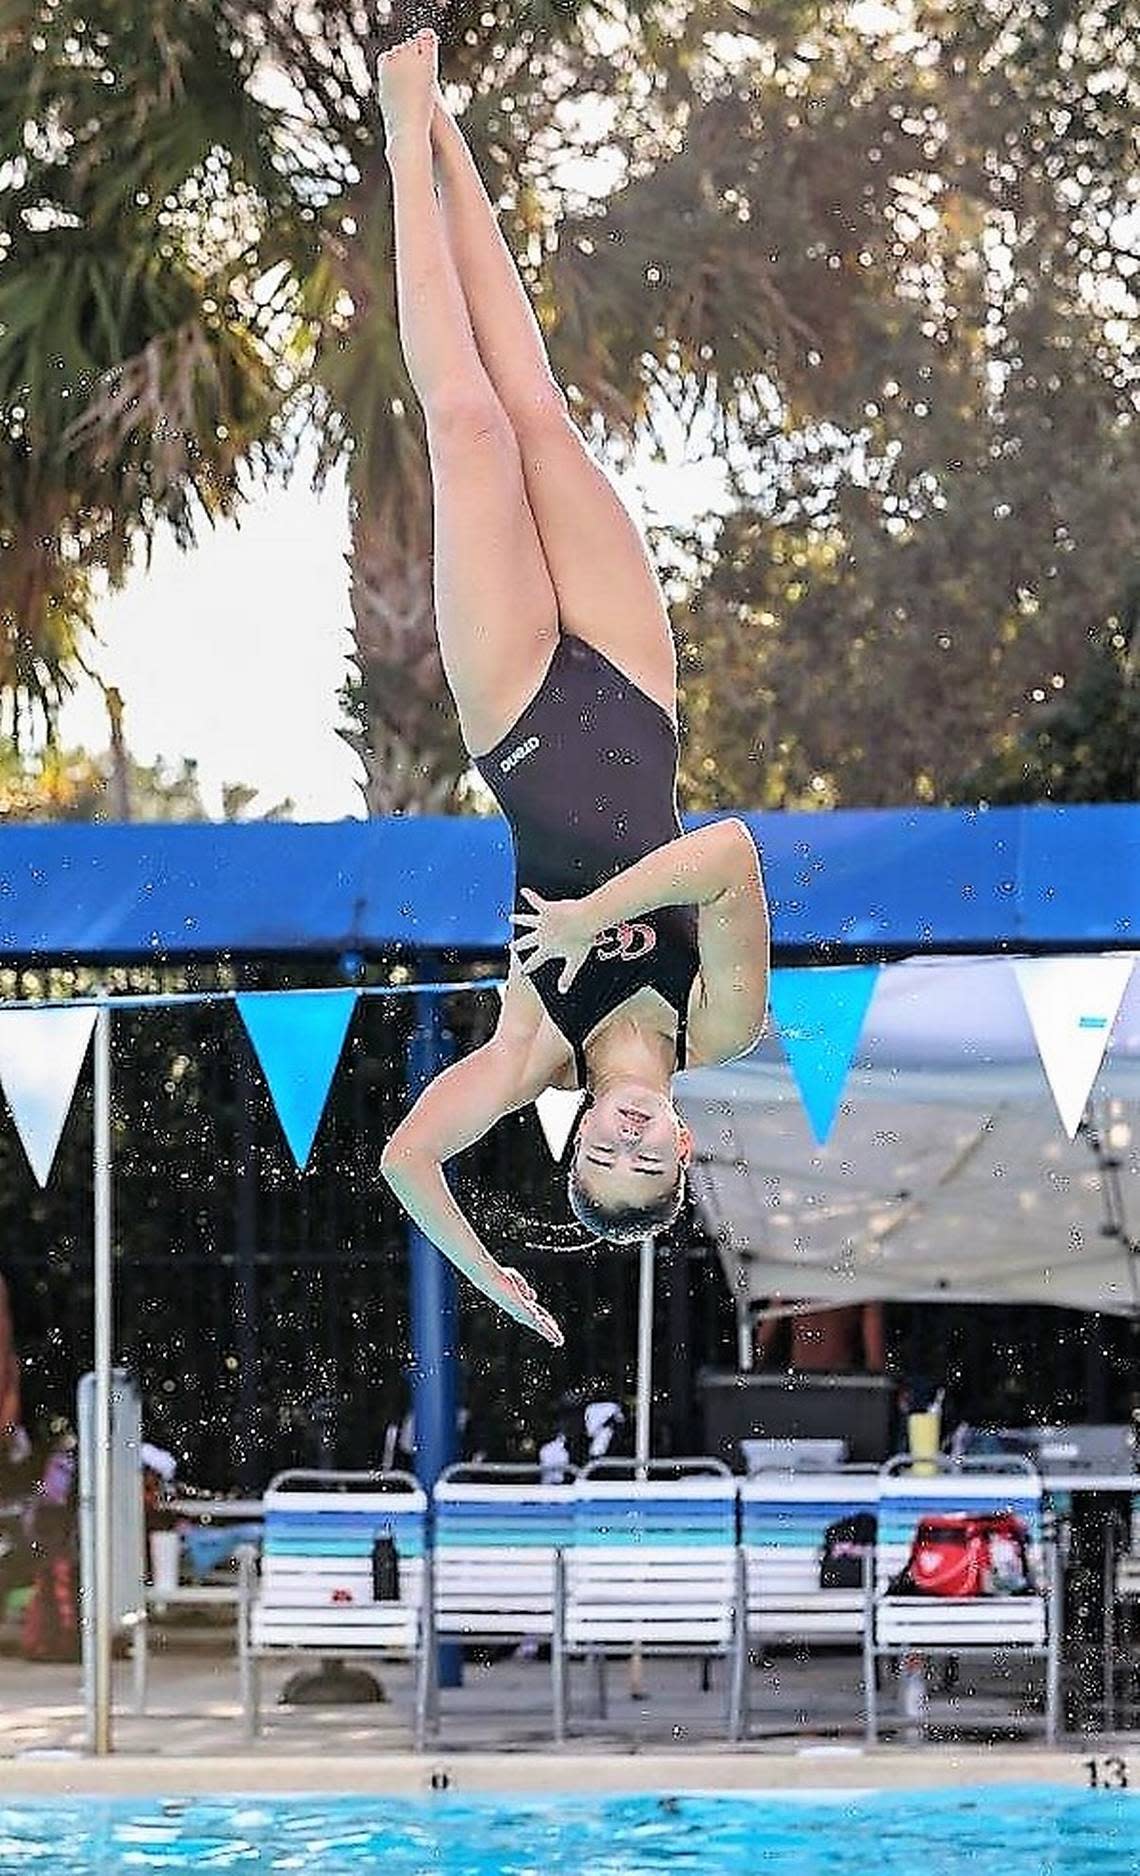 Cardinal Gibbons freshman diver Juliet Radich set a state record in 1-meter springboard at the region championships.